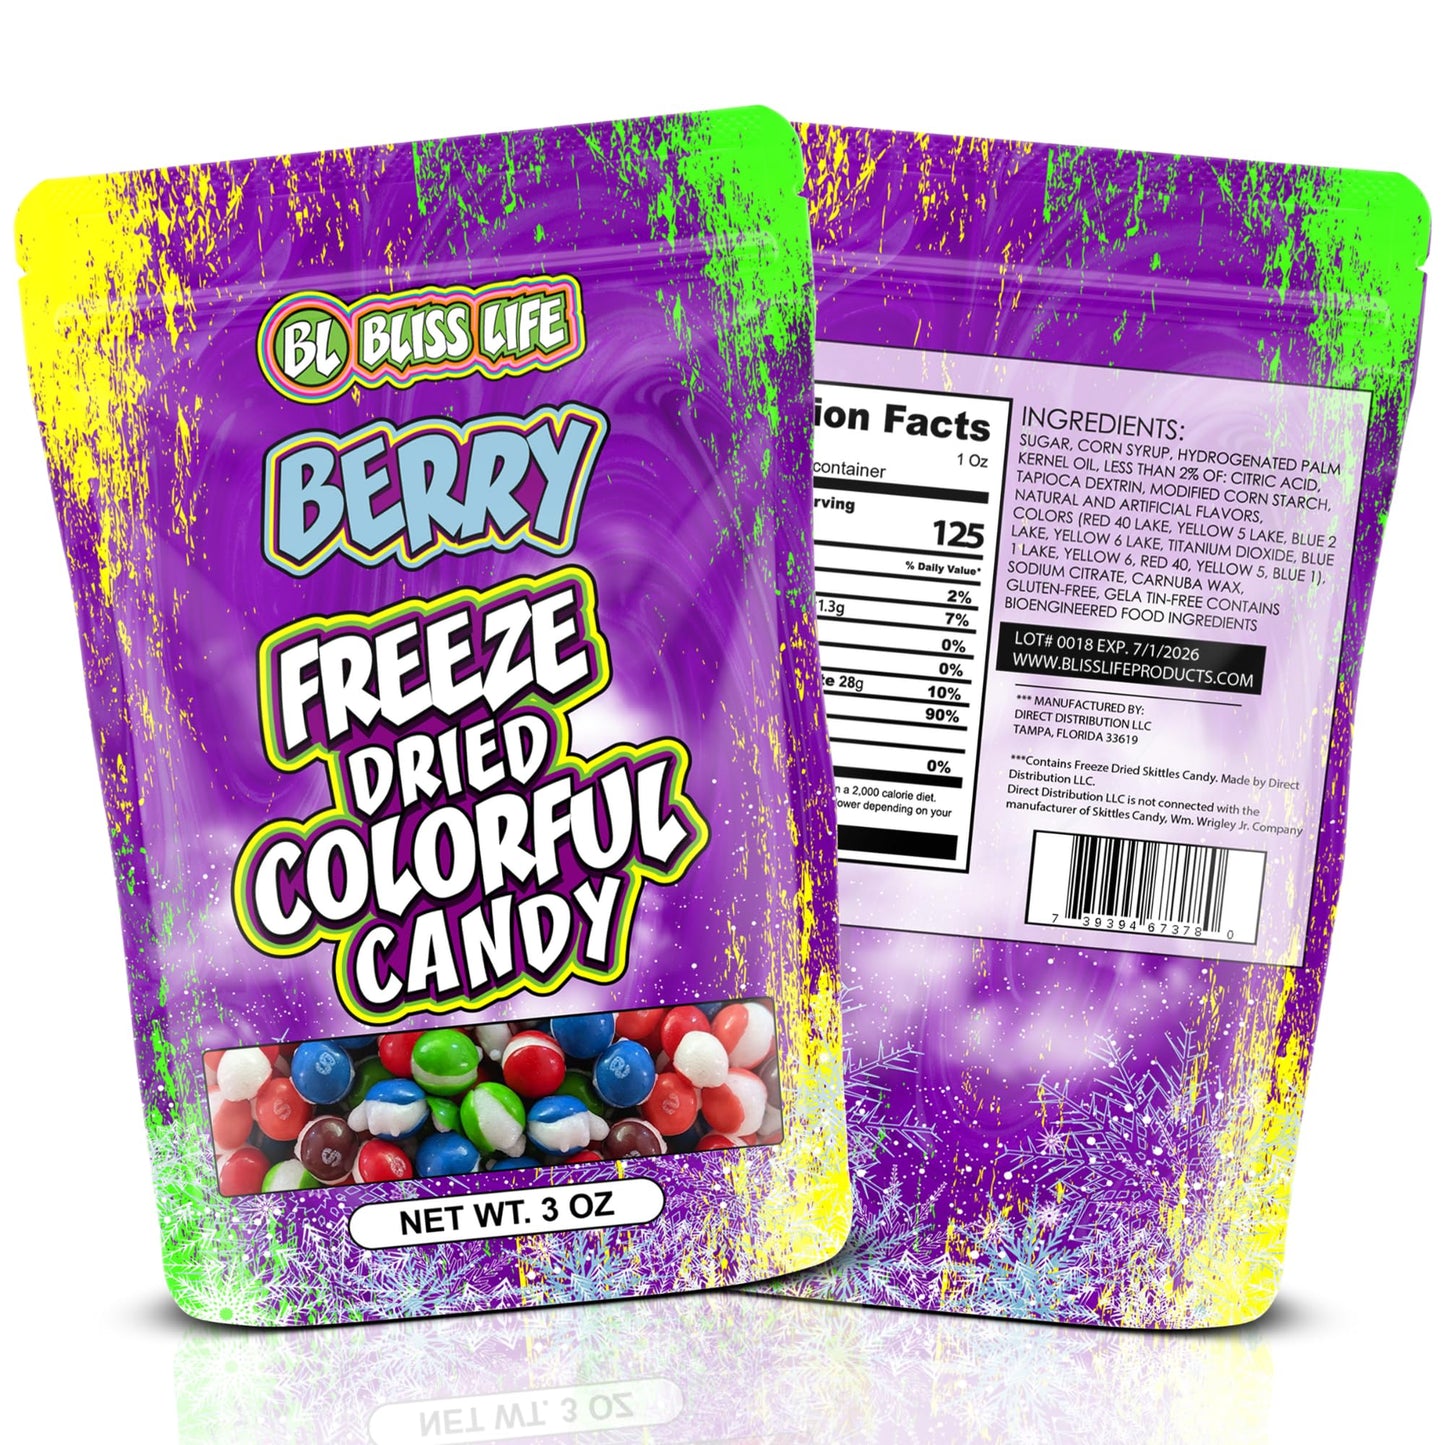 Freeze Dried Colorful Candy Bliss life candy